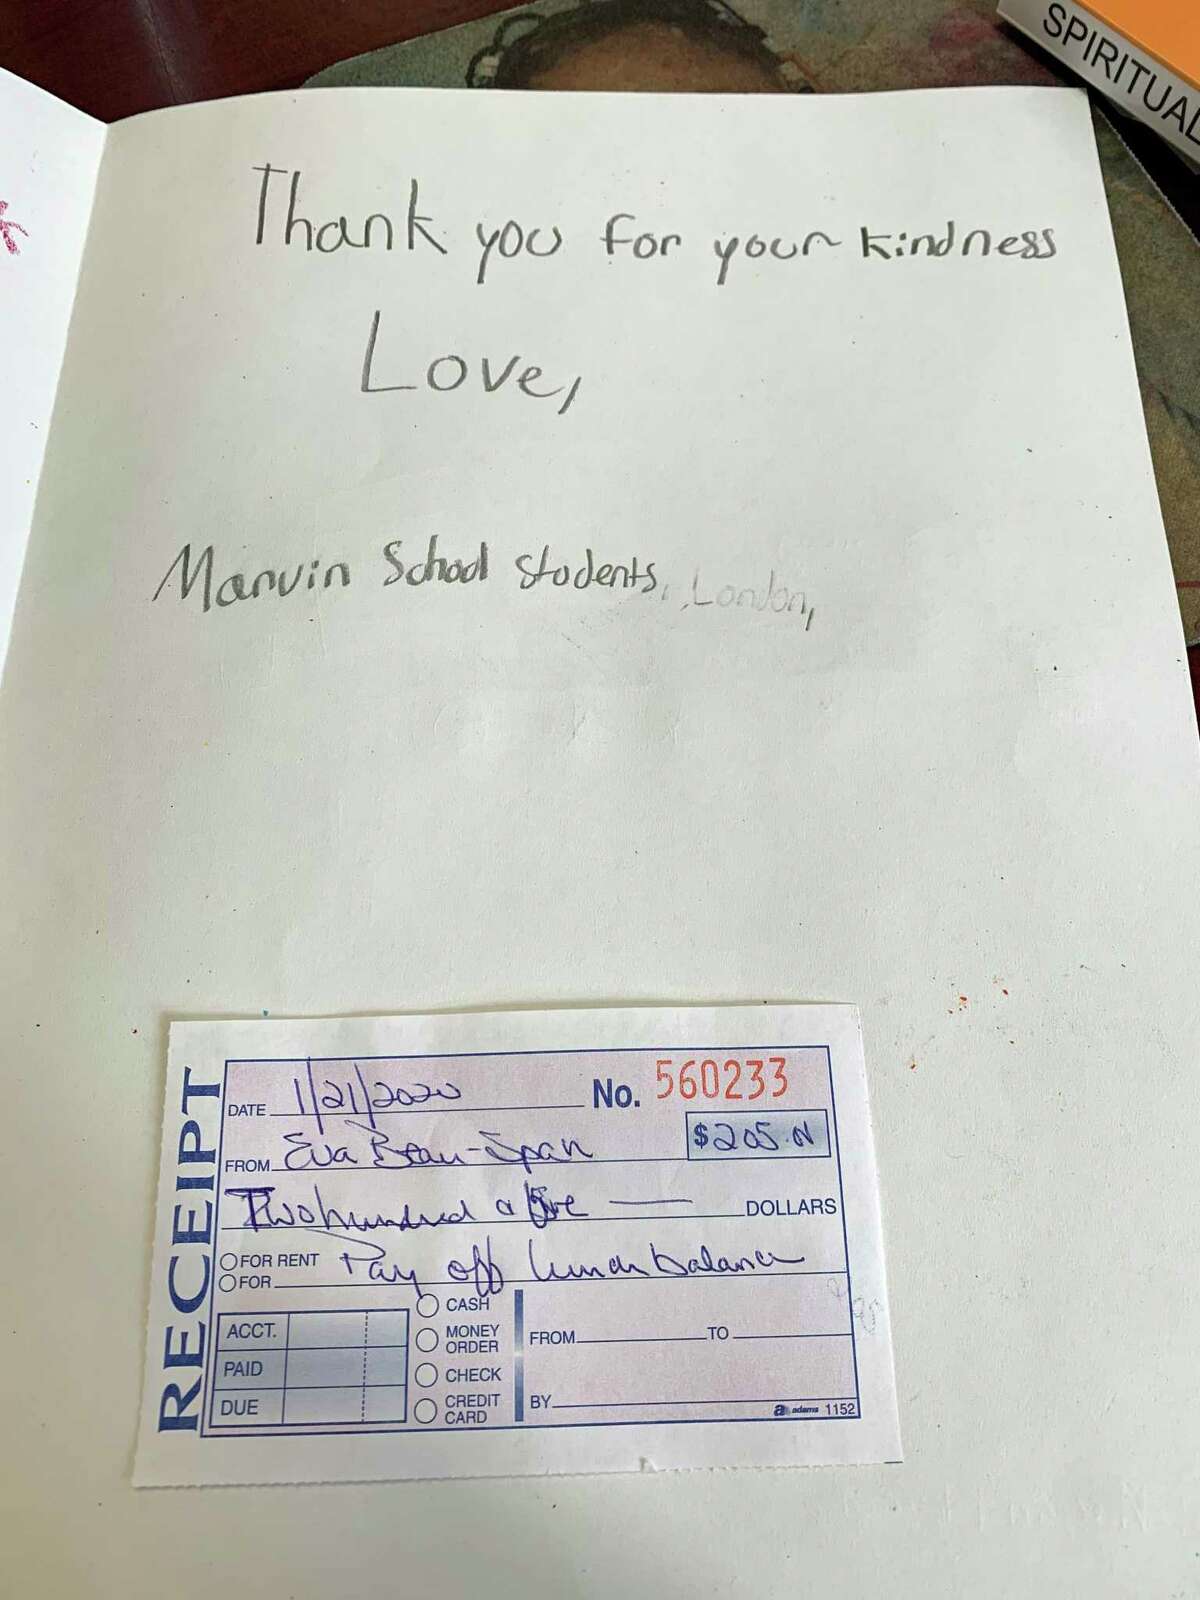 A thank you note from Marvin Elementary School students to Eva Beau-Span, who is working to eliminate Norwalk's student lunch debt.